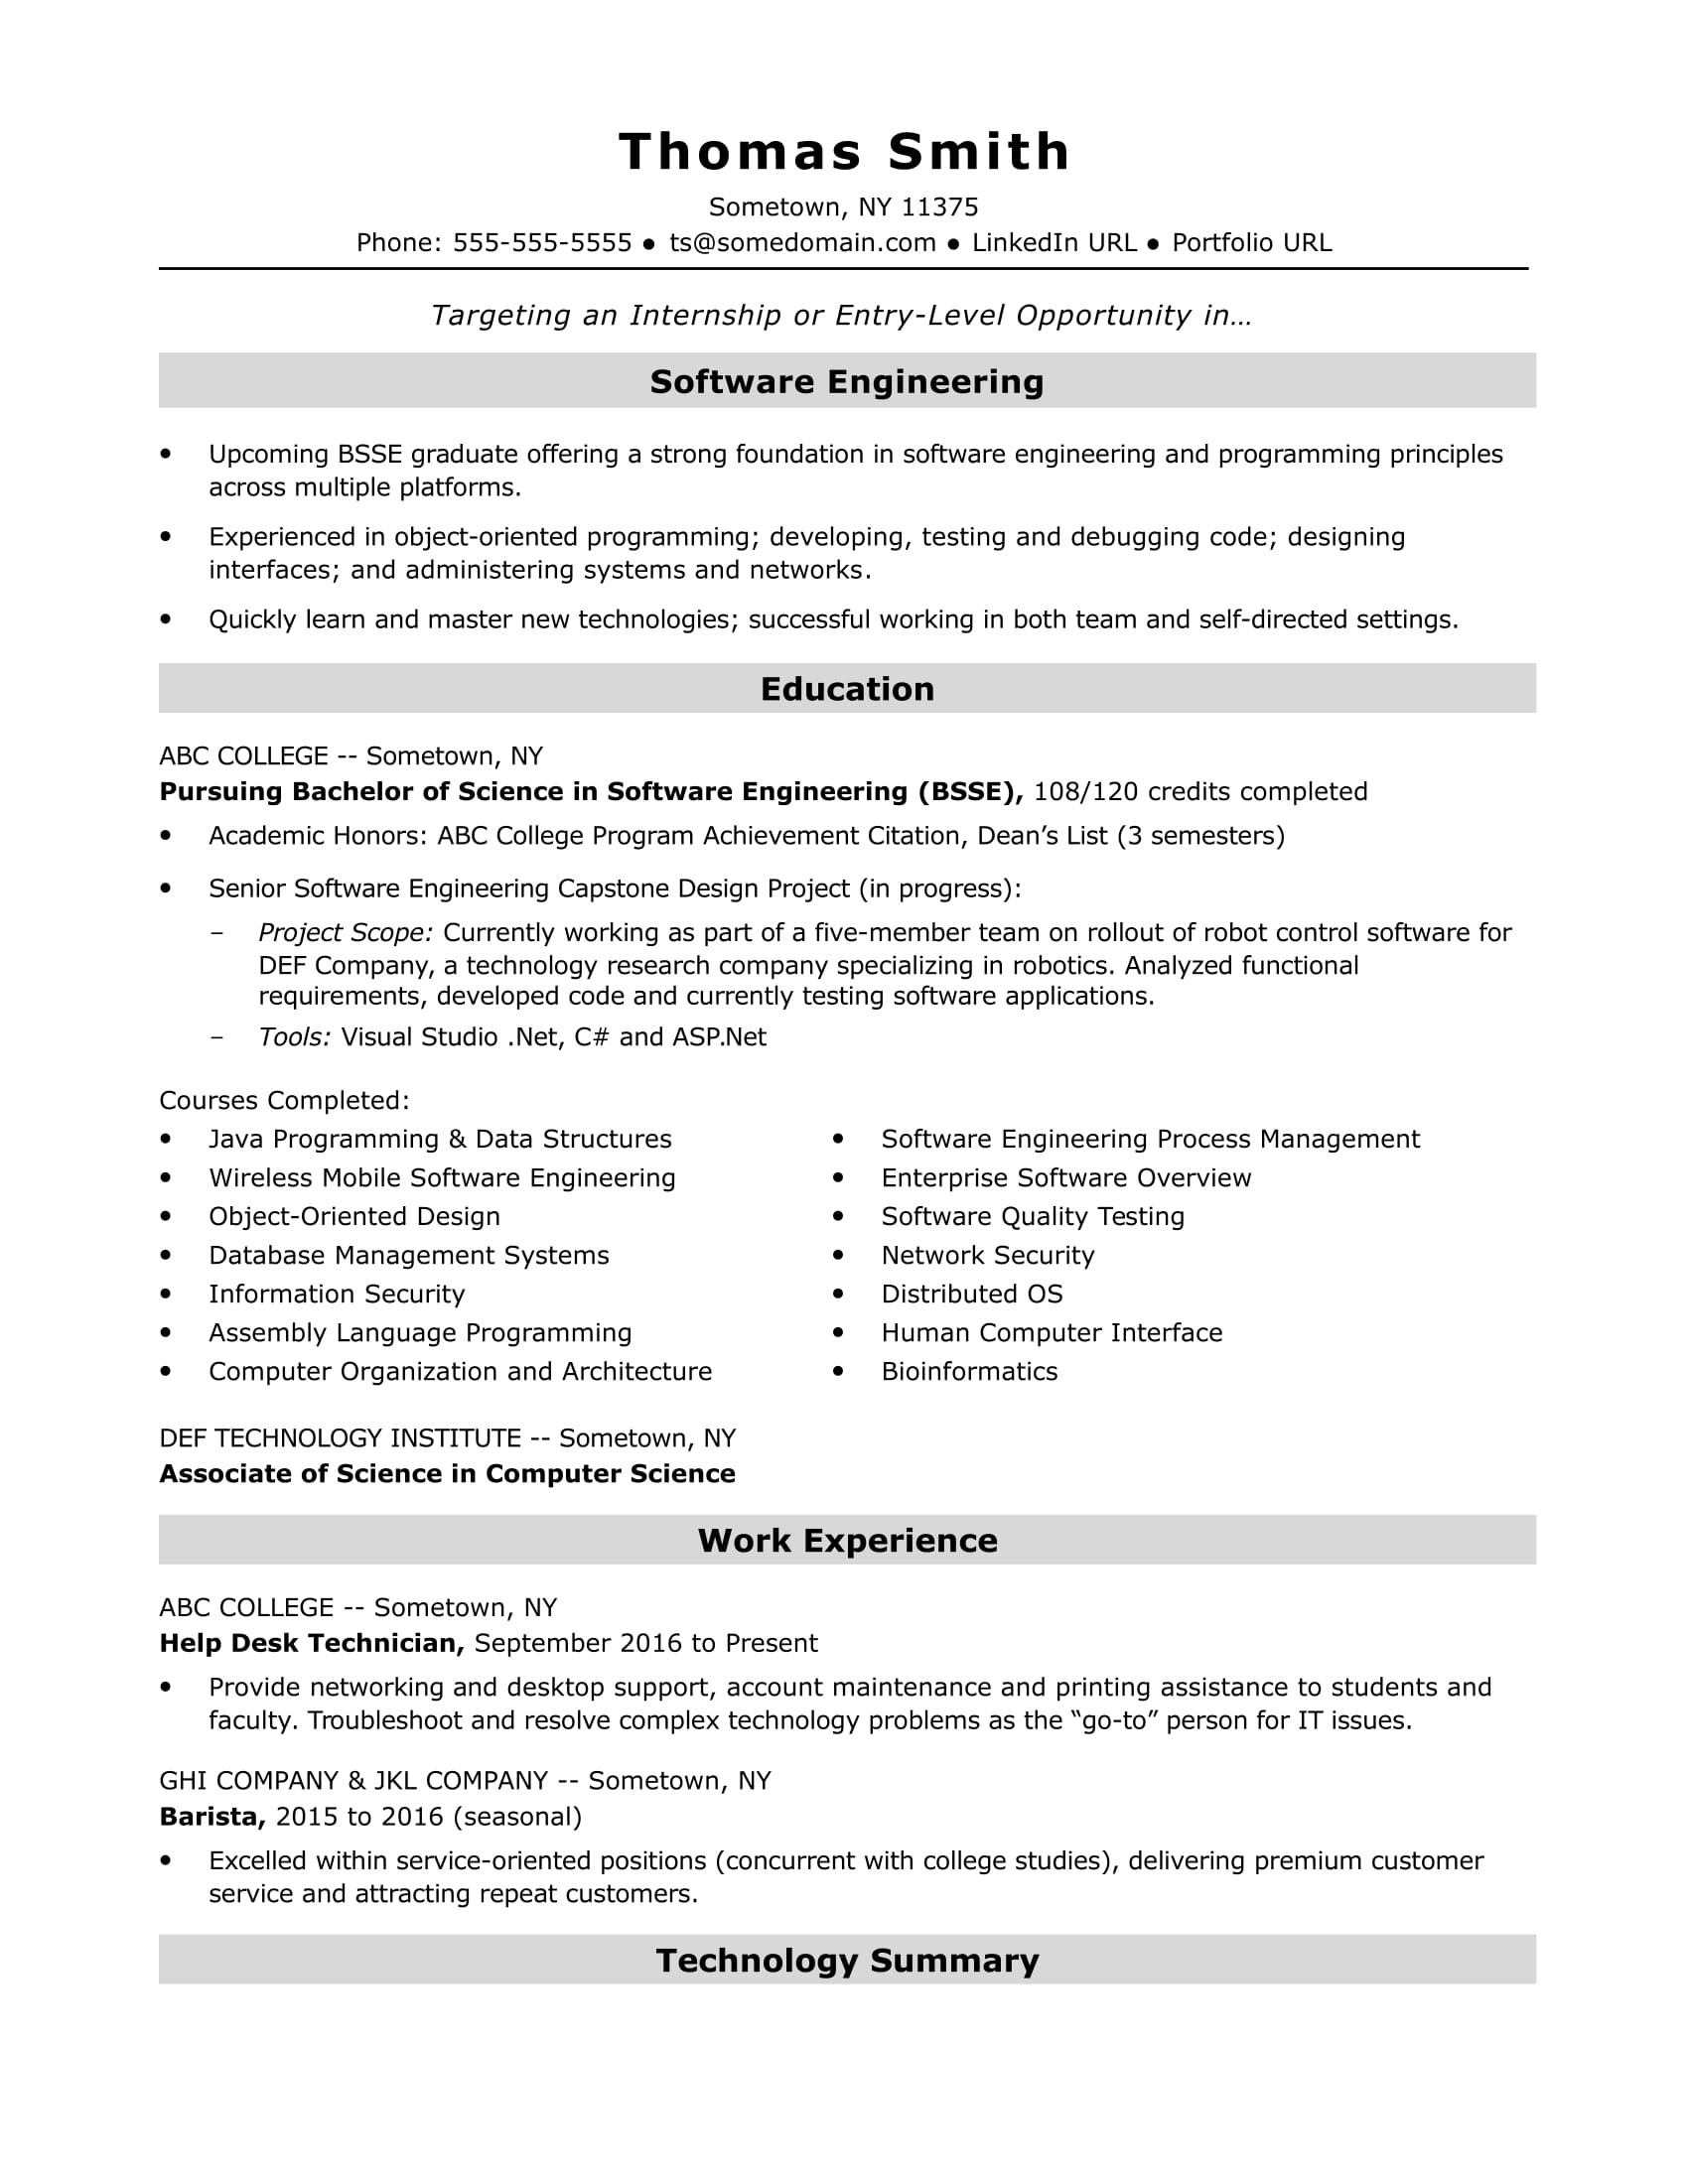 Sample Resume for Computer Science Engineering Students Freshers Entry-level software Engineer Resume Sample Monster.com